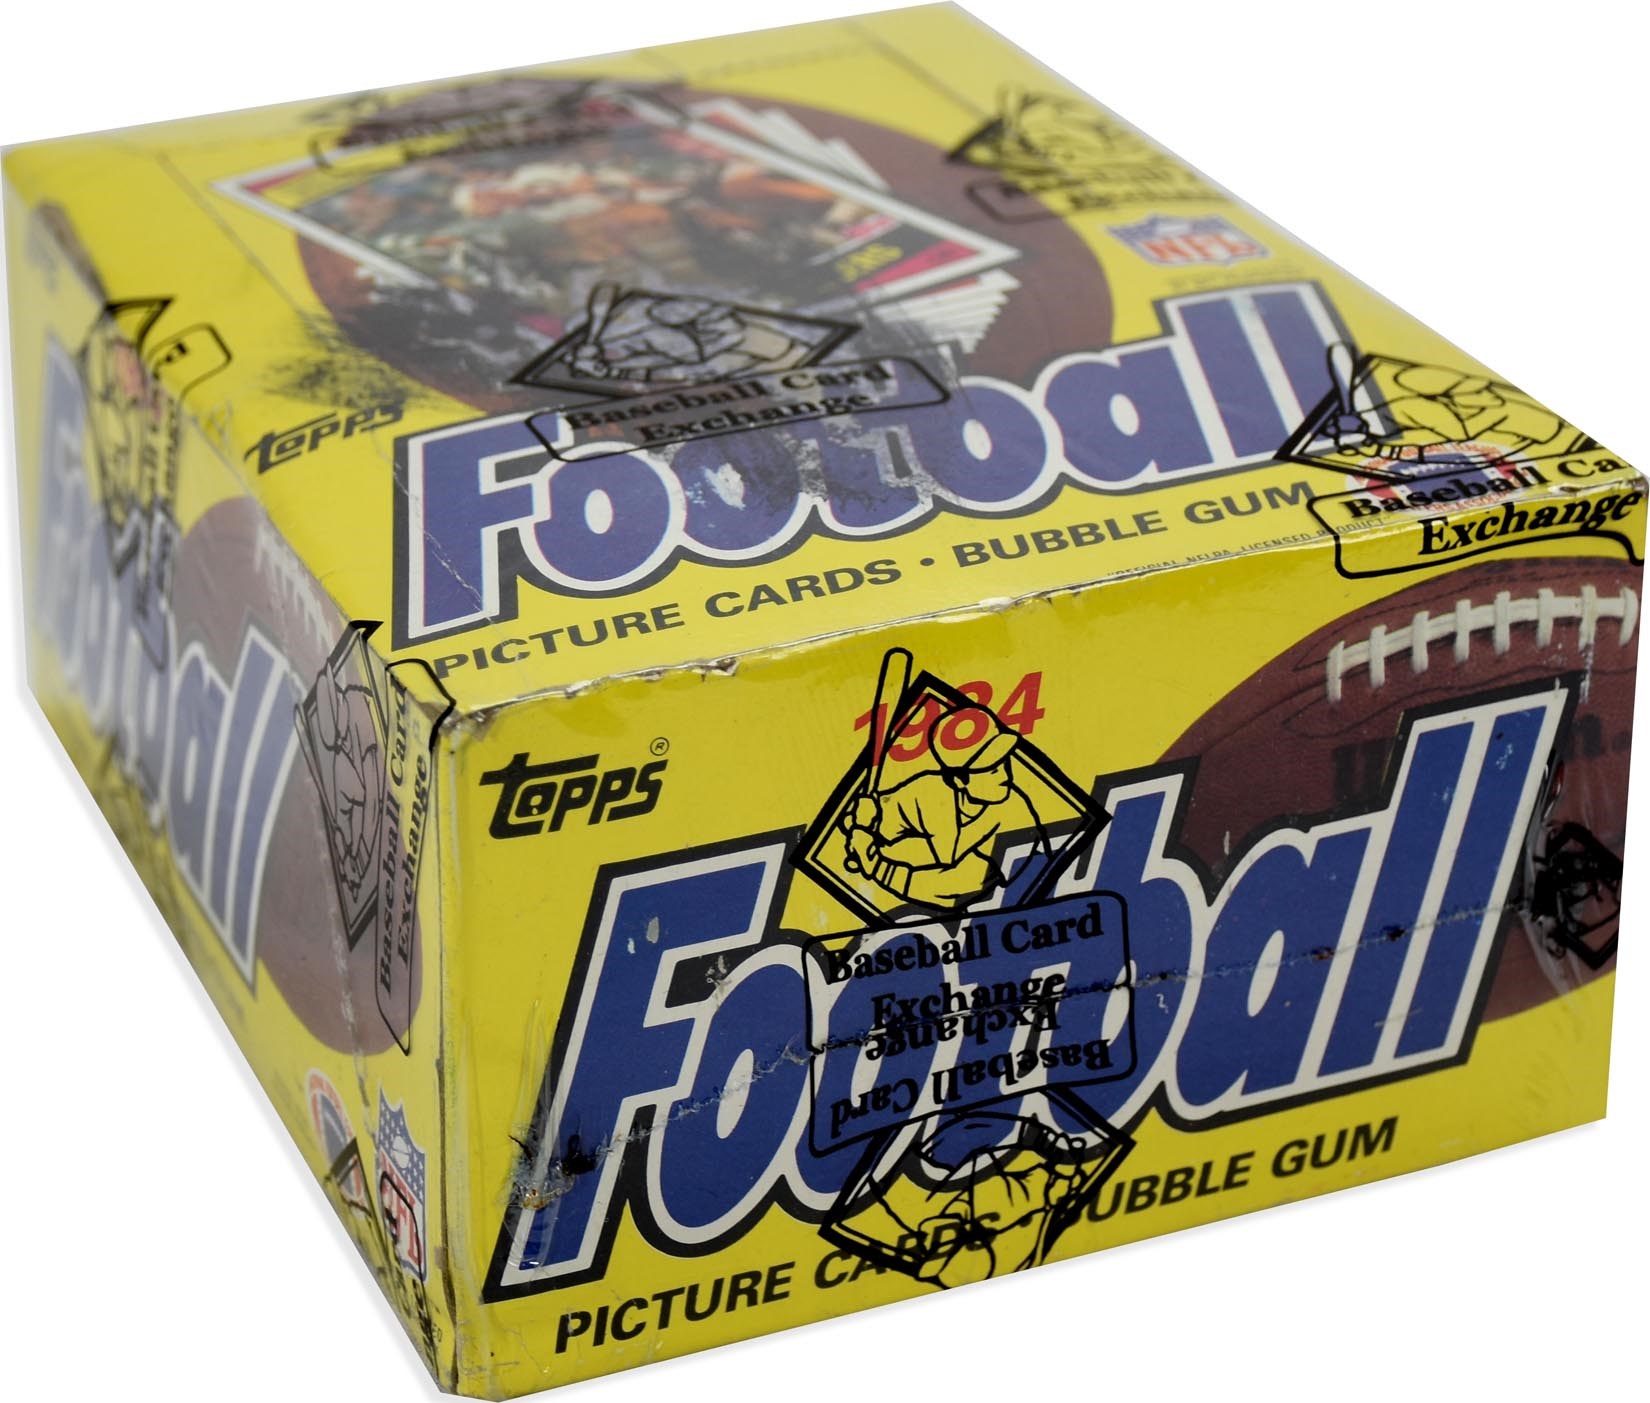 Unopened Wax Packs Boxes and Cases - 1984 Topps Football Unopened Wax Box (BBCE)